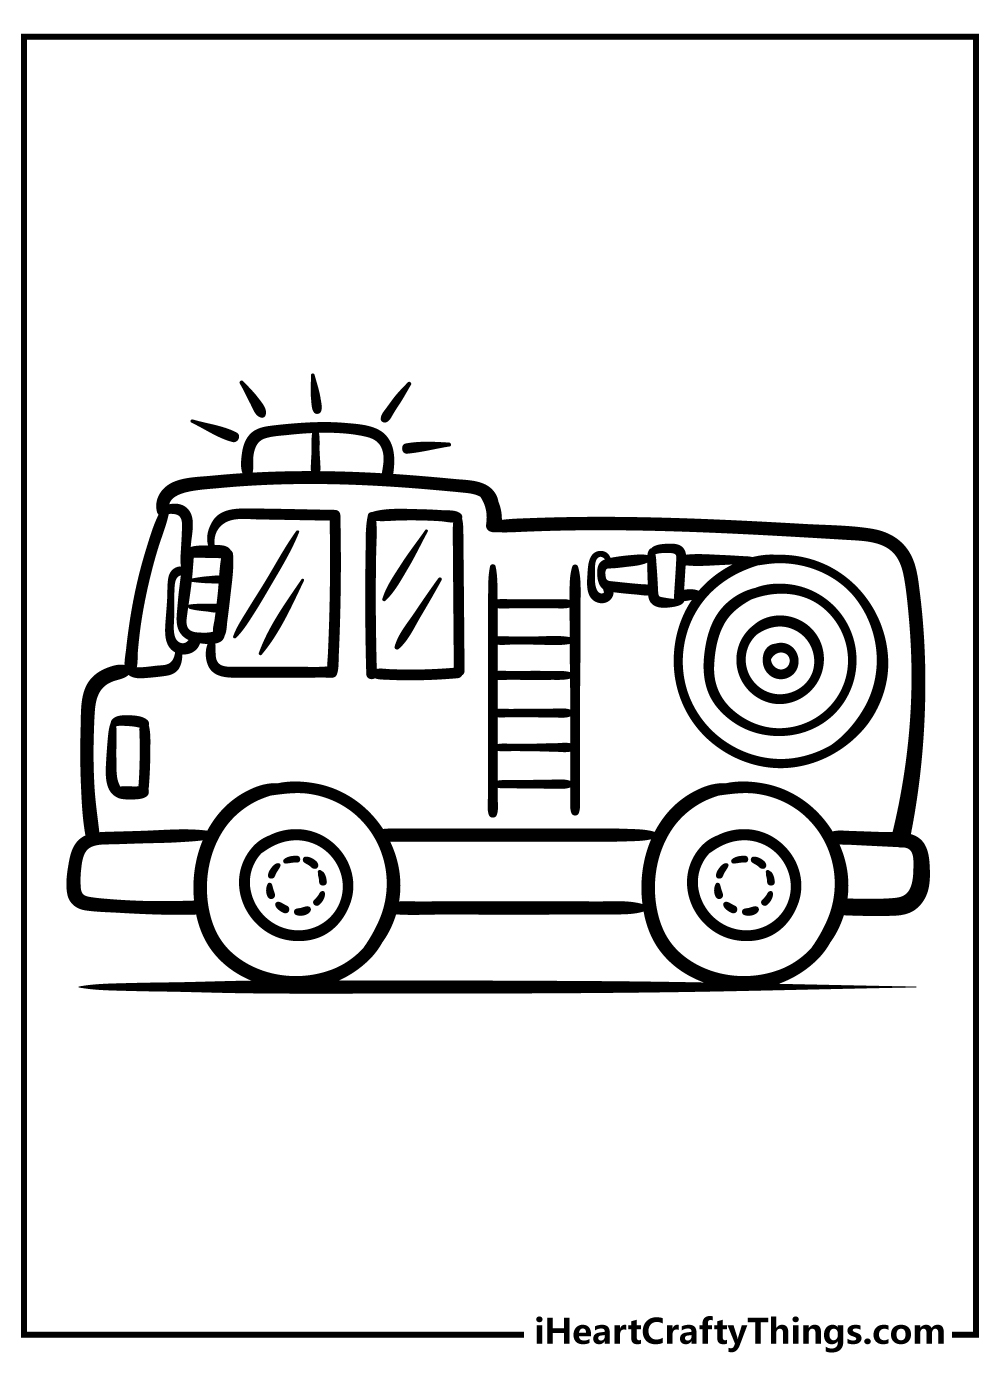 Fire Truck Coloring Pages for kids free download